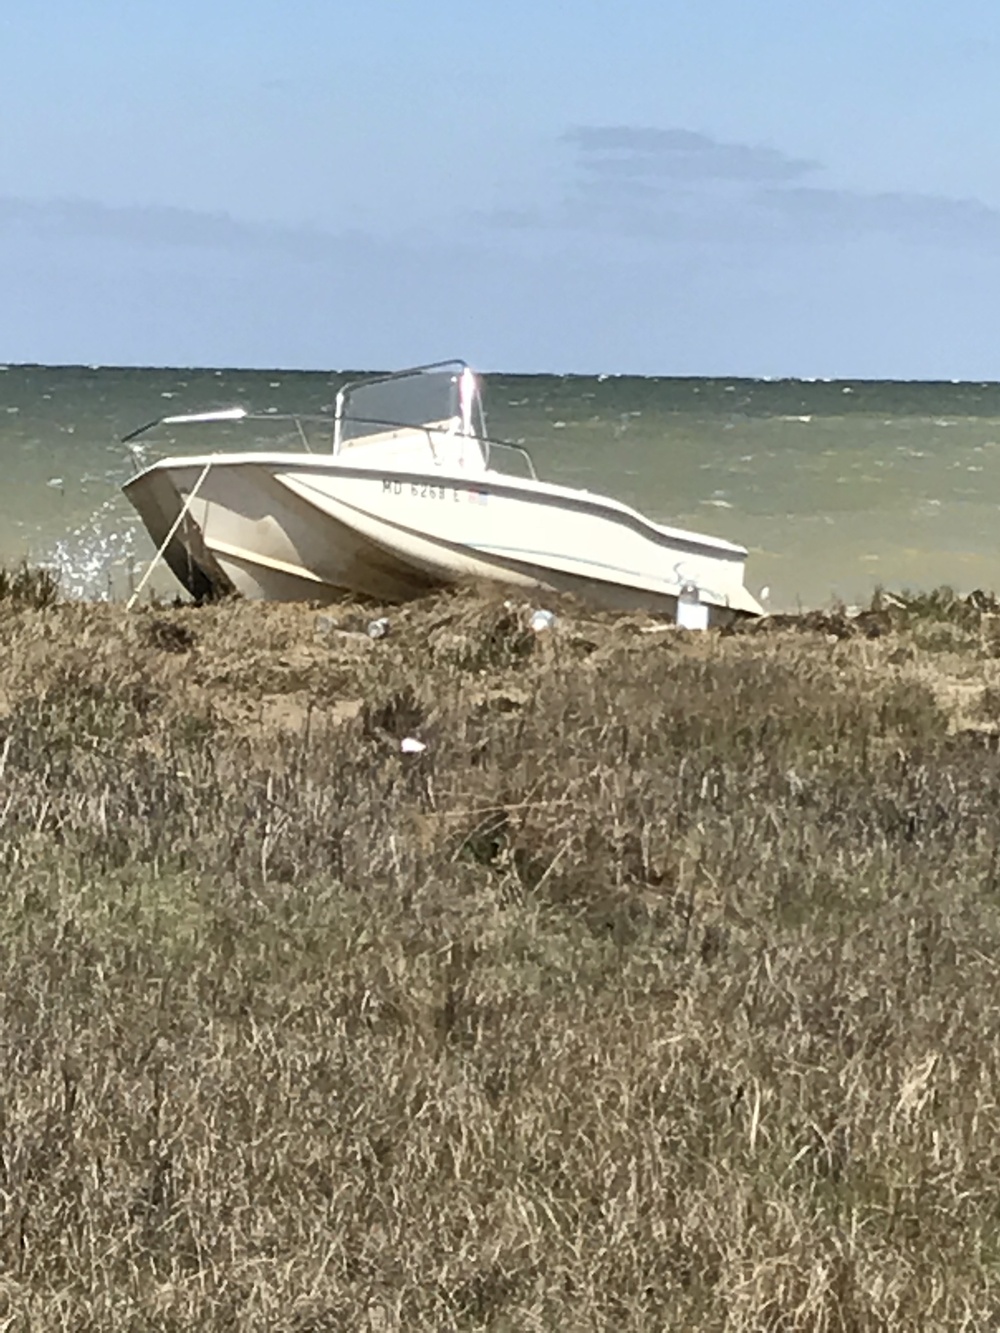 Coast Guard assists boaters stranded on island in Chesapeake Bay